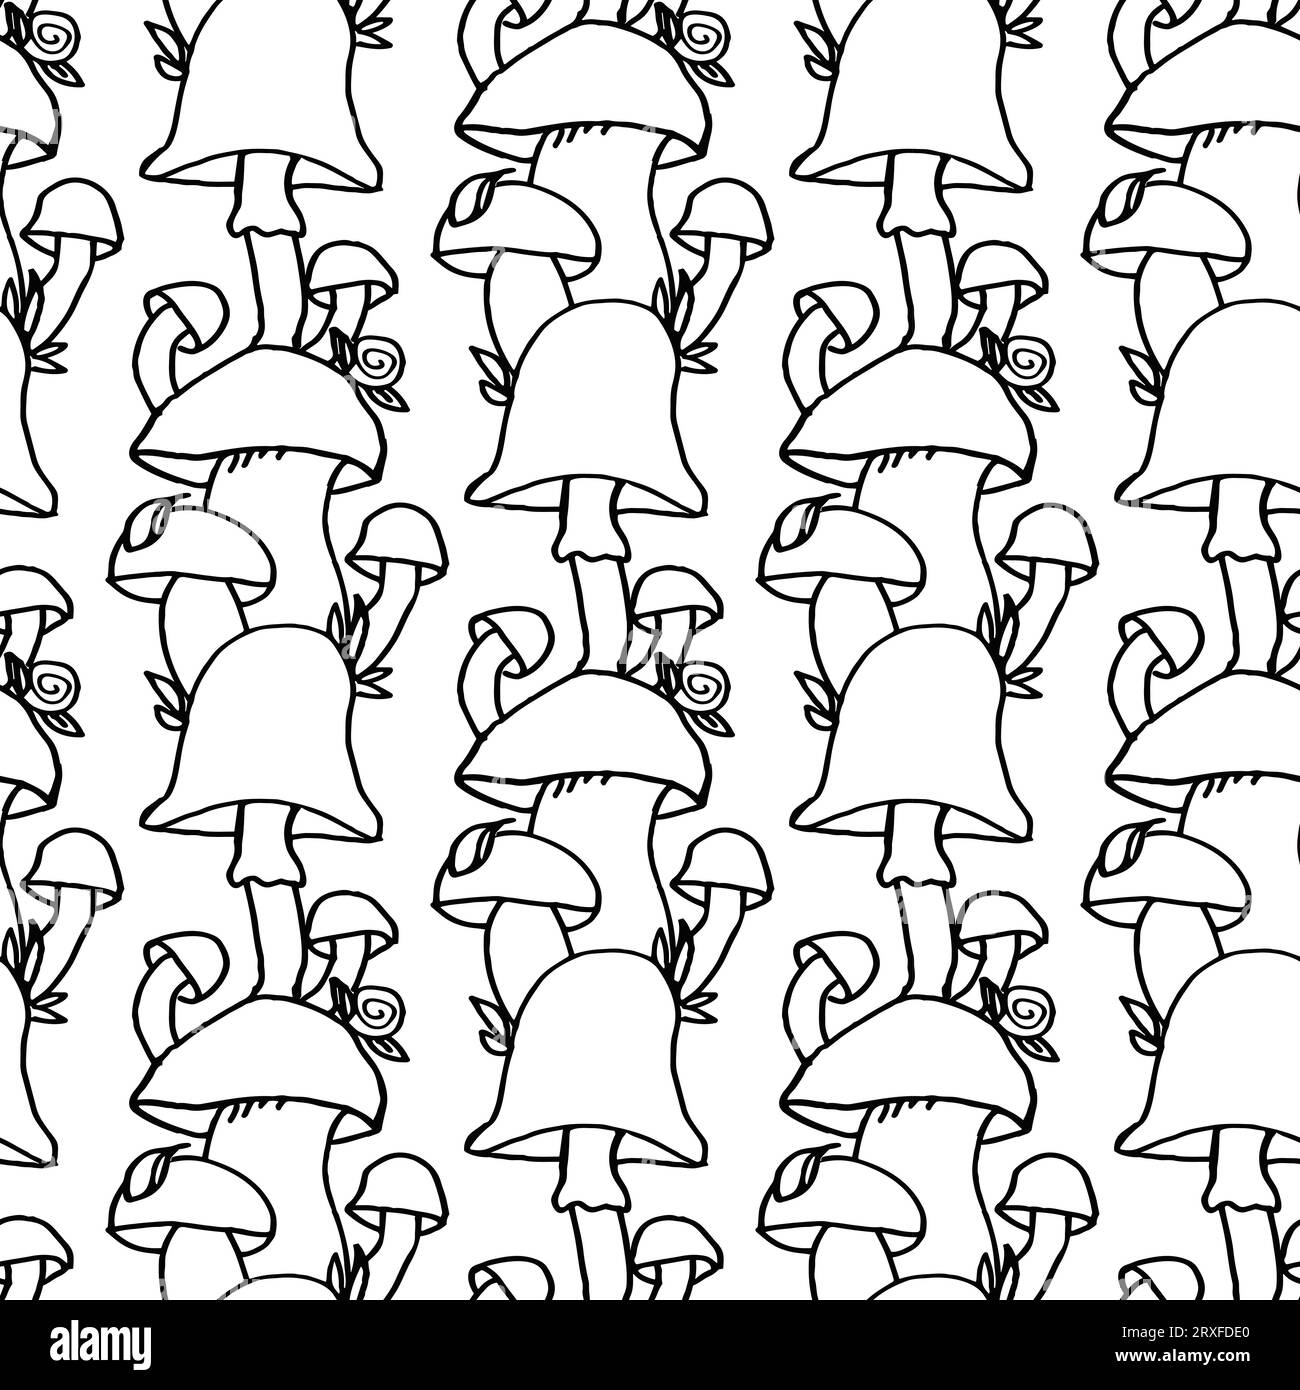 Mushroom autumn seamless pattern with black and white mushrooms for textile design or wallpaper, scrapbook. Vector background with hand drawn element Stock Vector